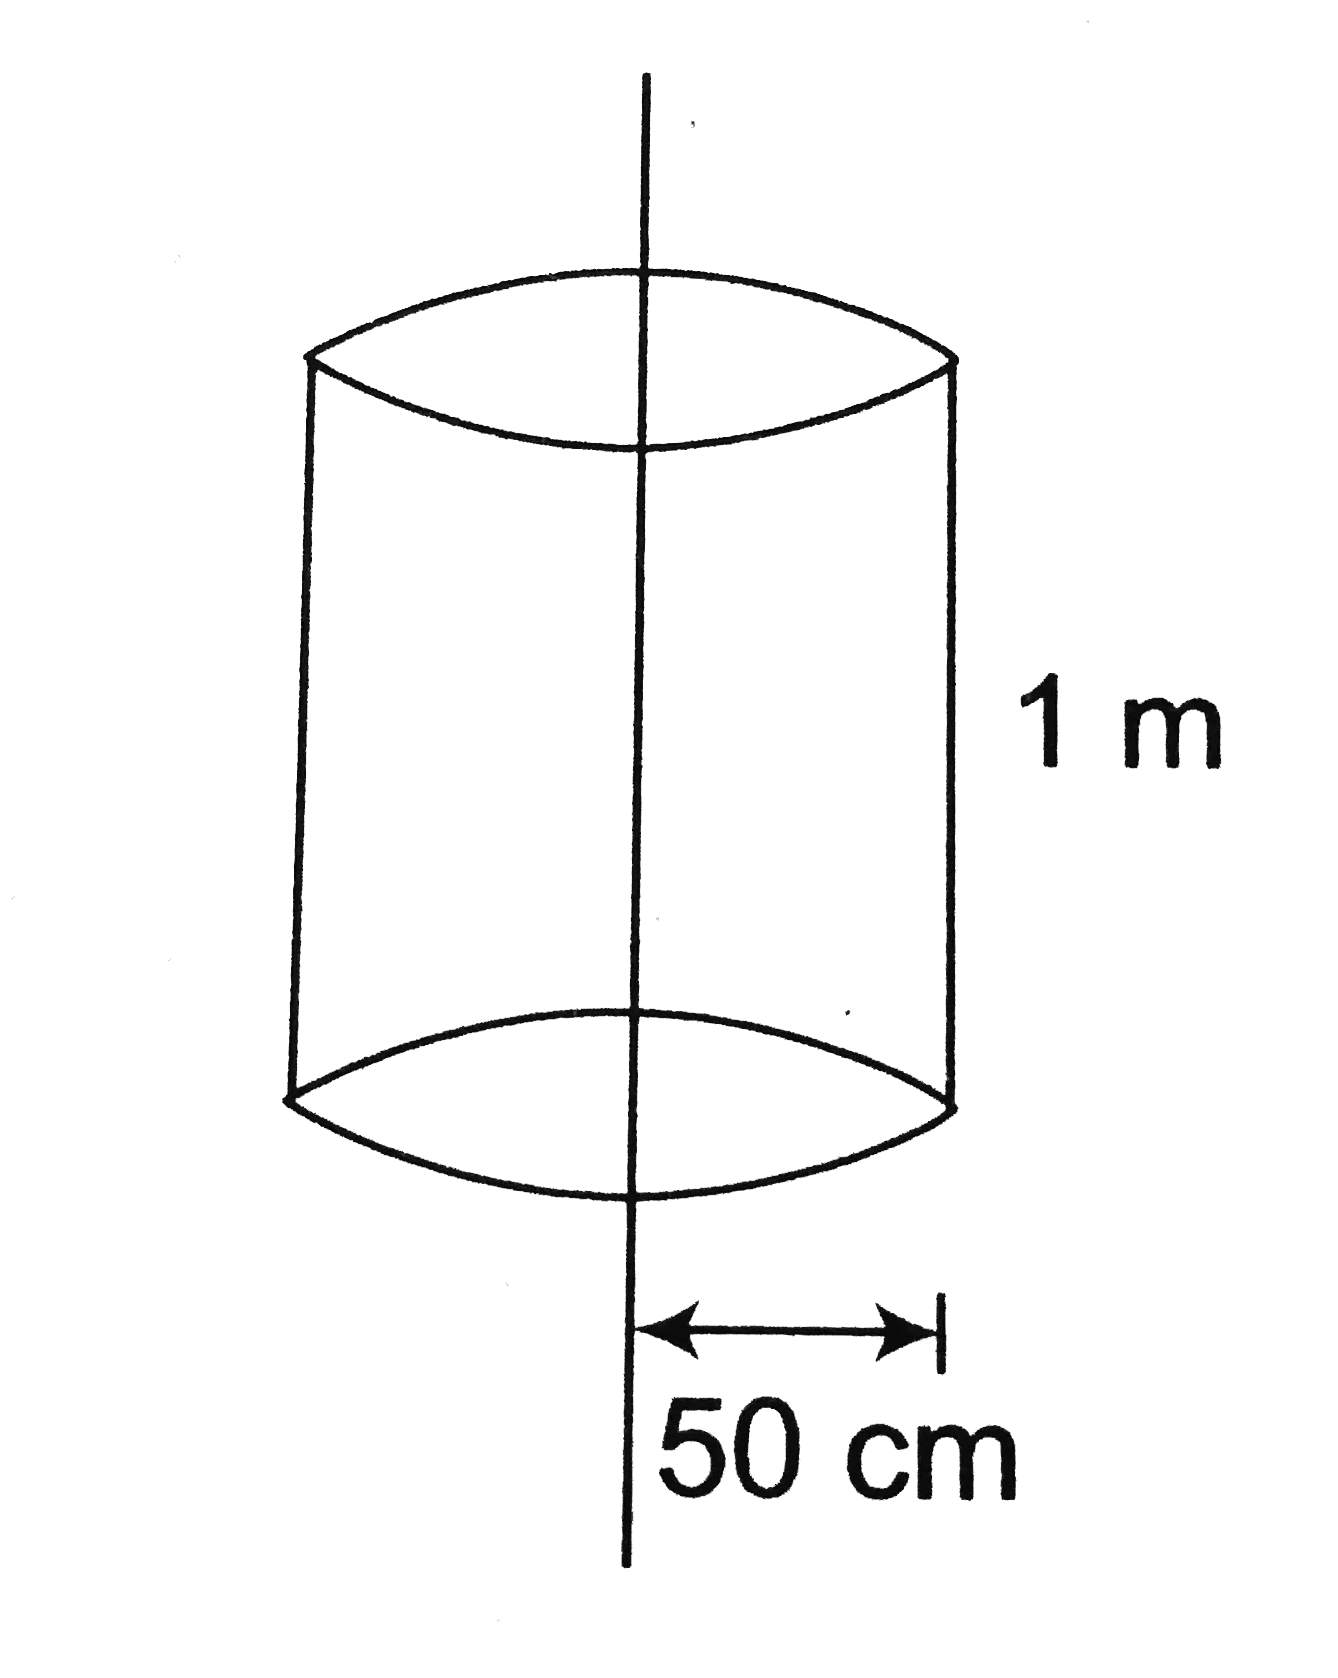 Electric charge is uniformly distributed along a along straight wire of radius 1 mm. The charge per centimeter length of the wire is Q coulomb. Another cyclindrical surface of radius 50 cm and length 1 m symmetrically enclose the wire ask shown in figure. The total electric flux passing through the cyclindrical surface is